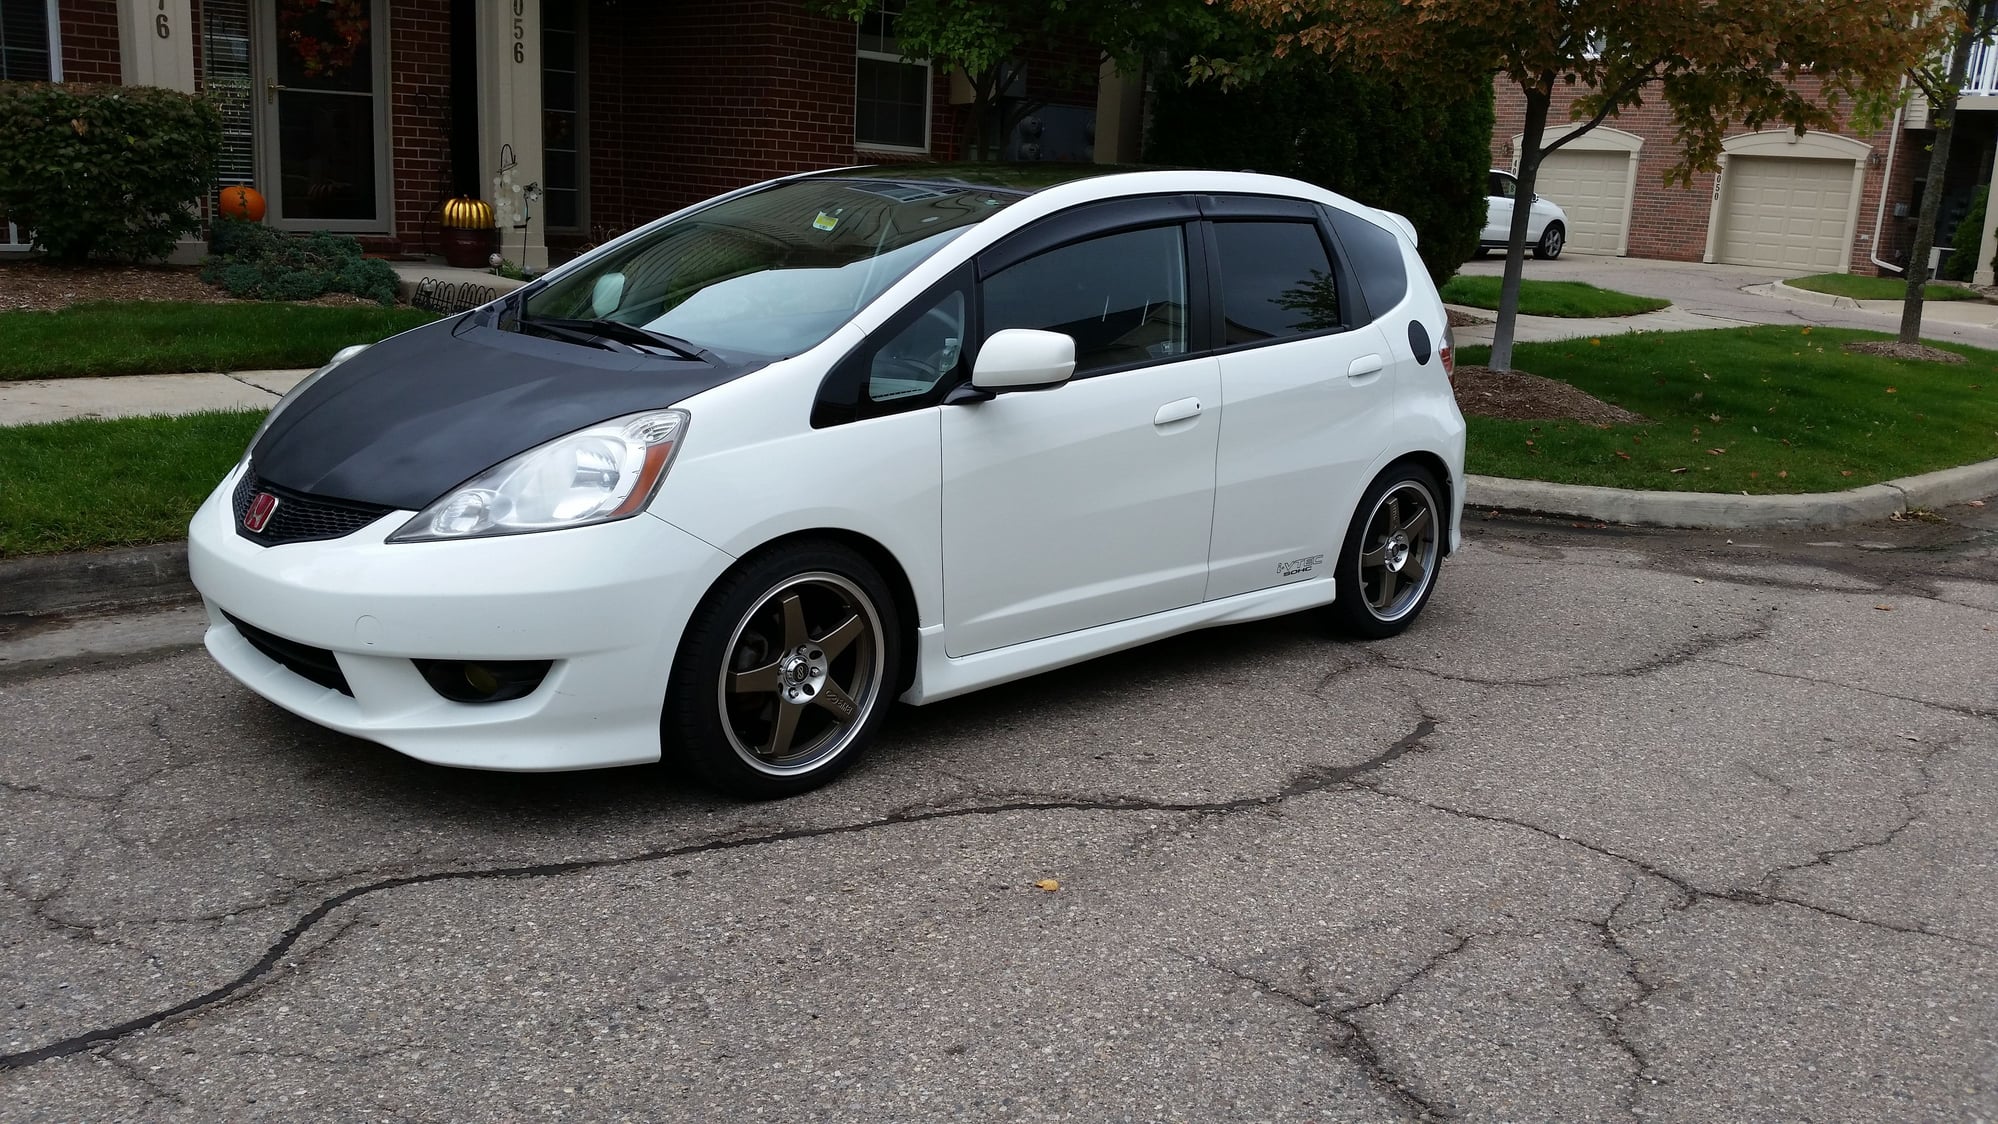 185/65/15 Winter Tires - Unofficial Honda FIT Forums